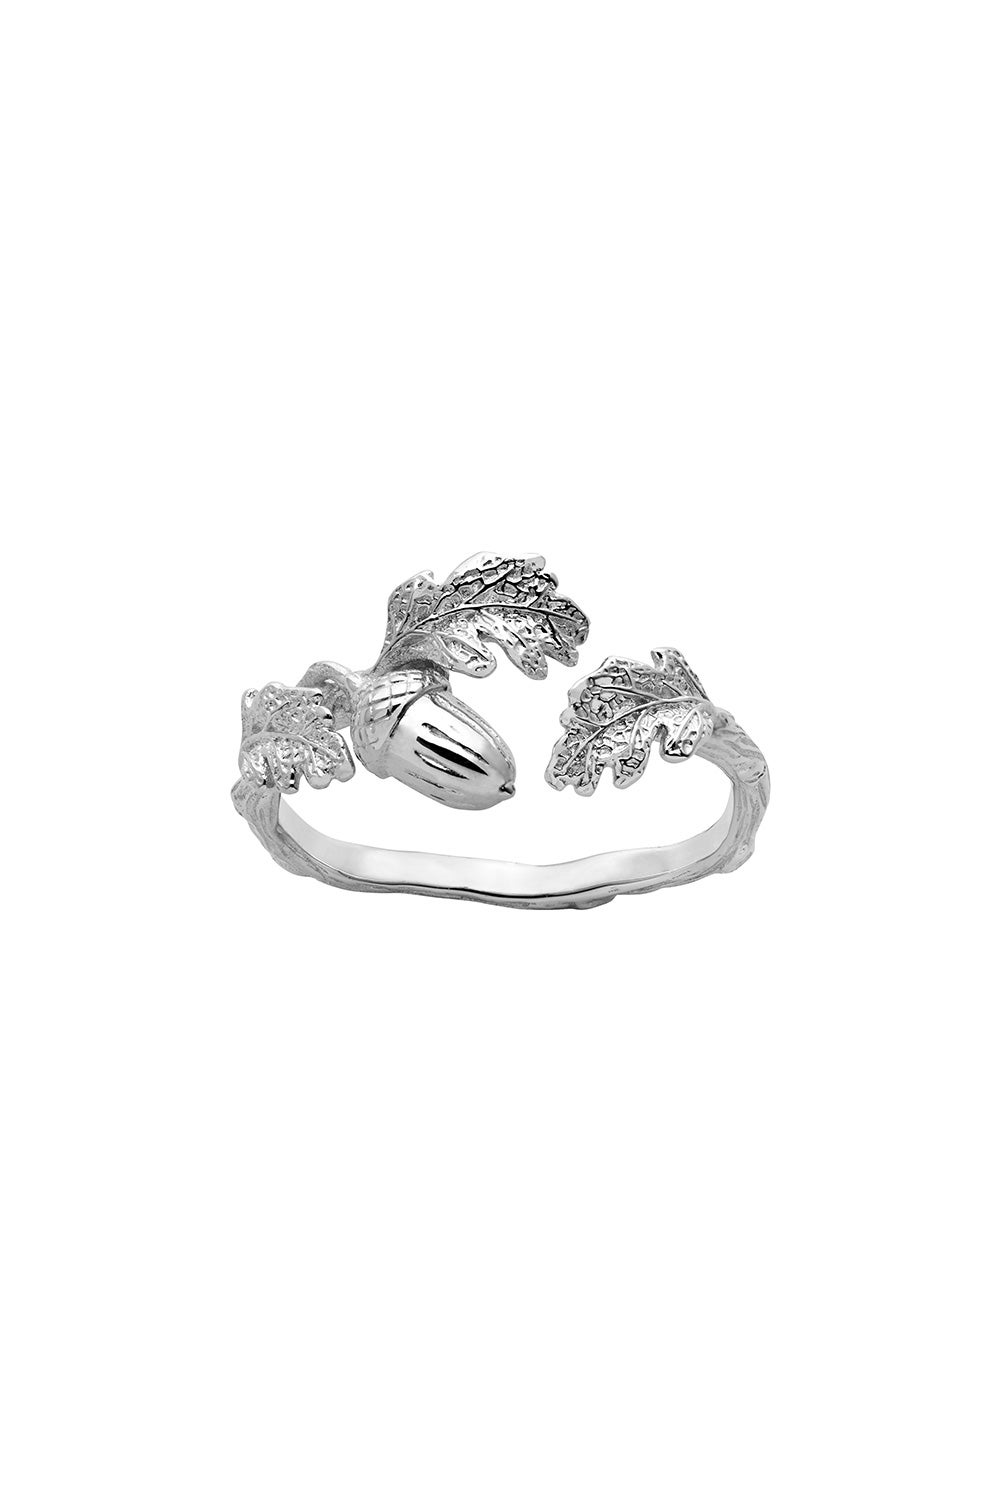 Acorn and Leaf Ring Silver